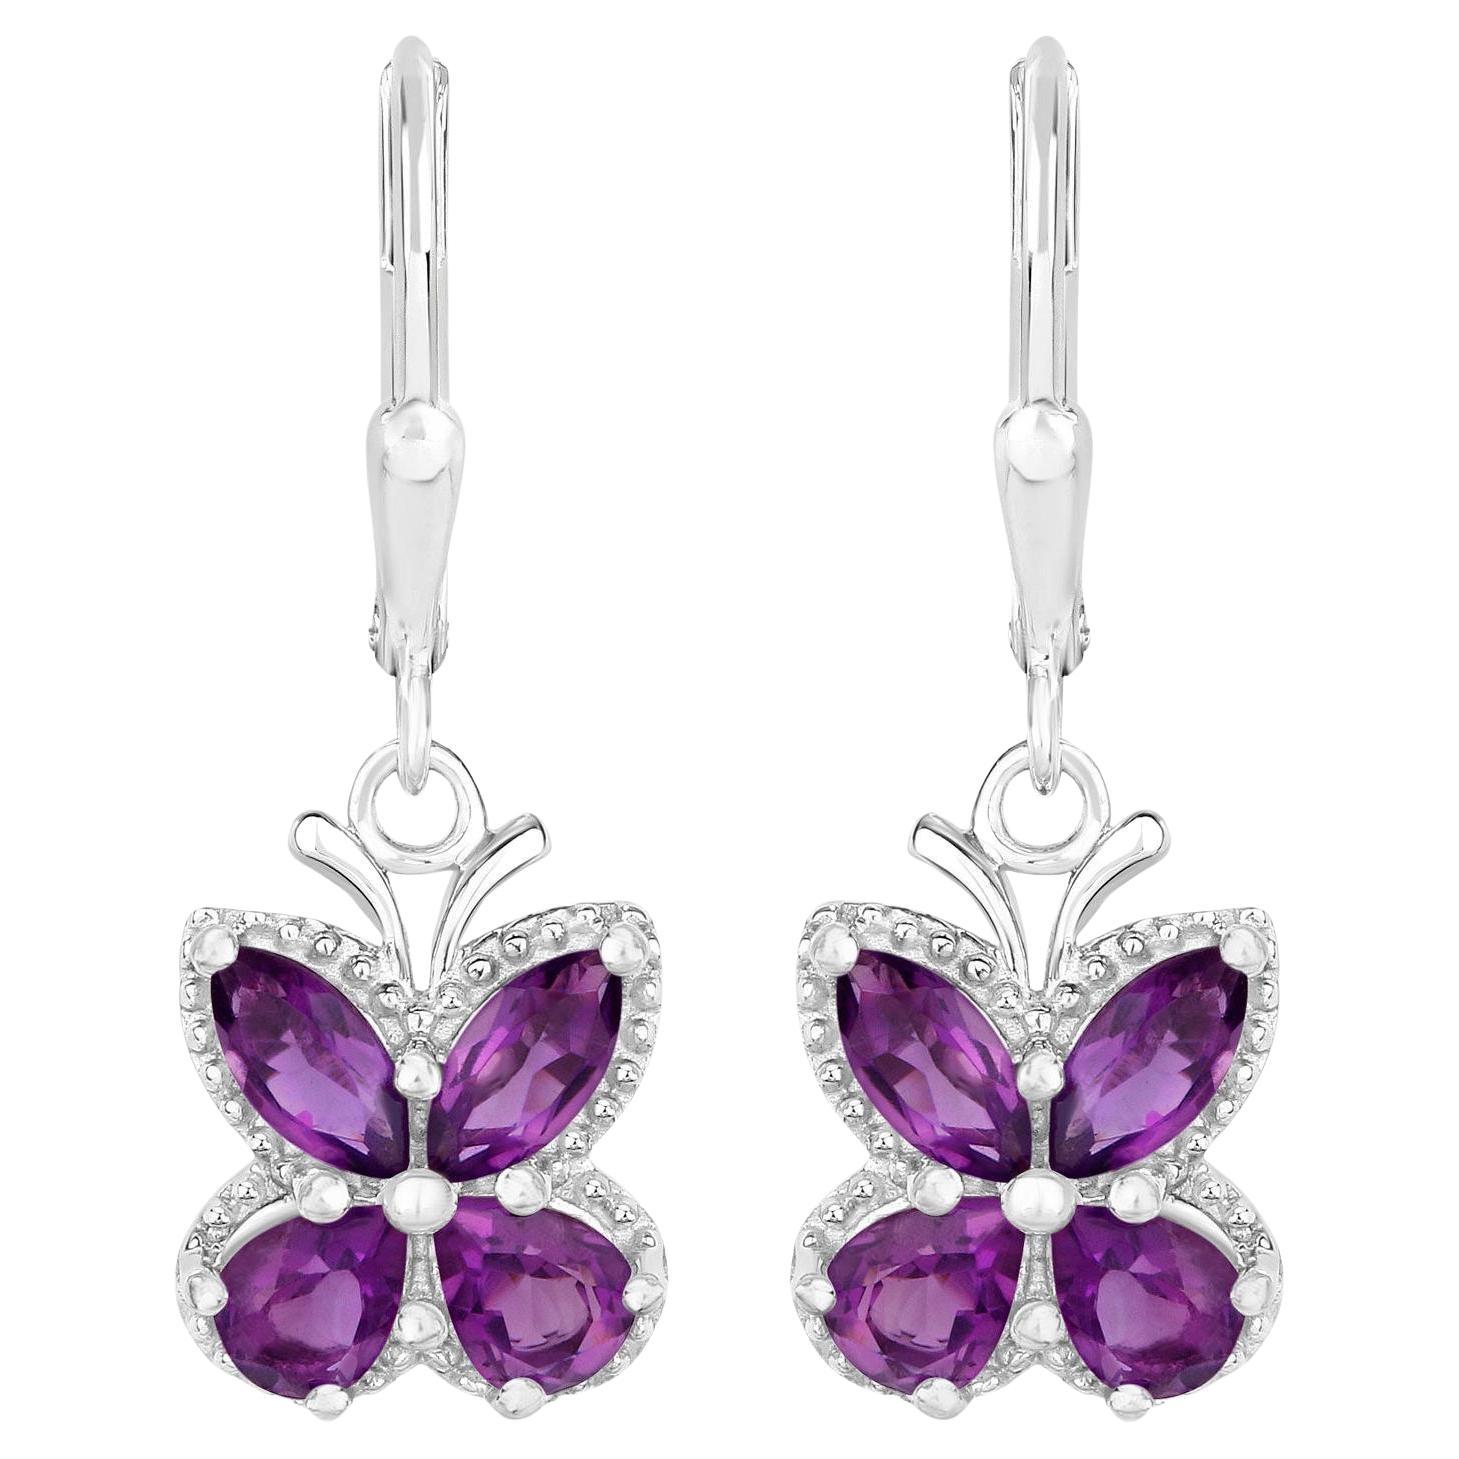 Amethyst Butterfly Earrings 2.12 Carats Rhodium Plated Sterling Silver For Sale